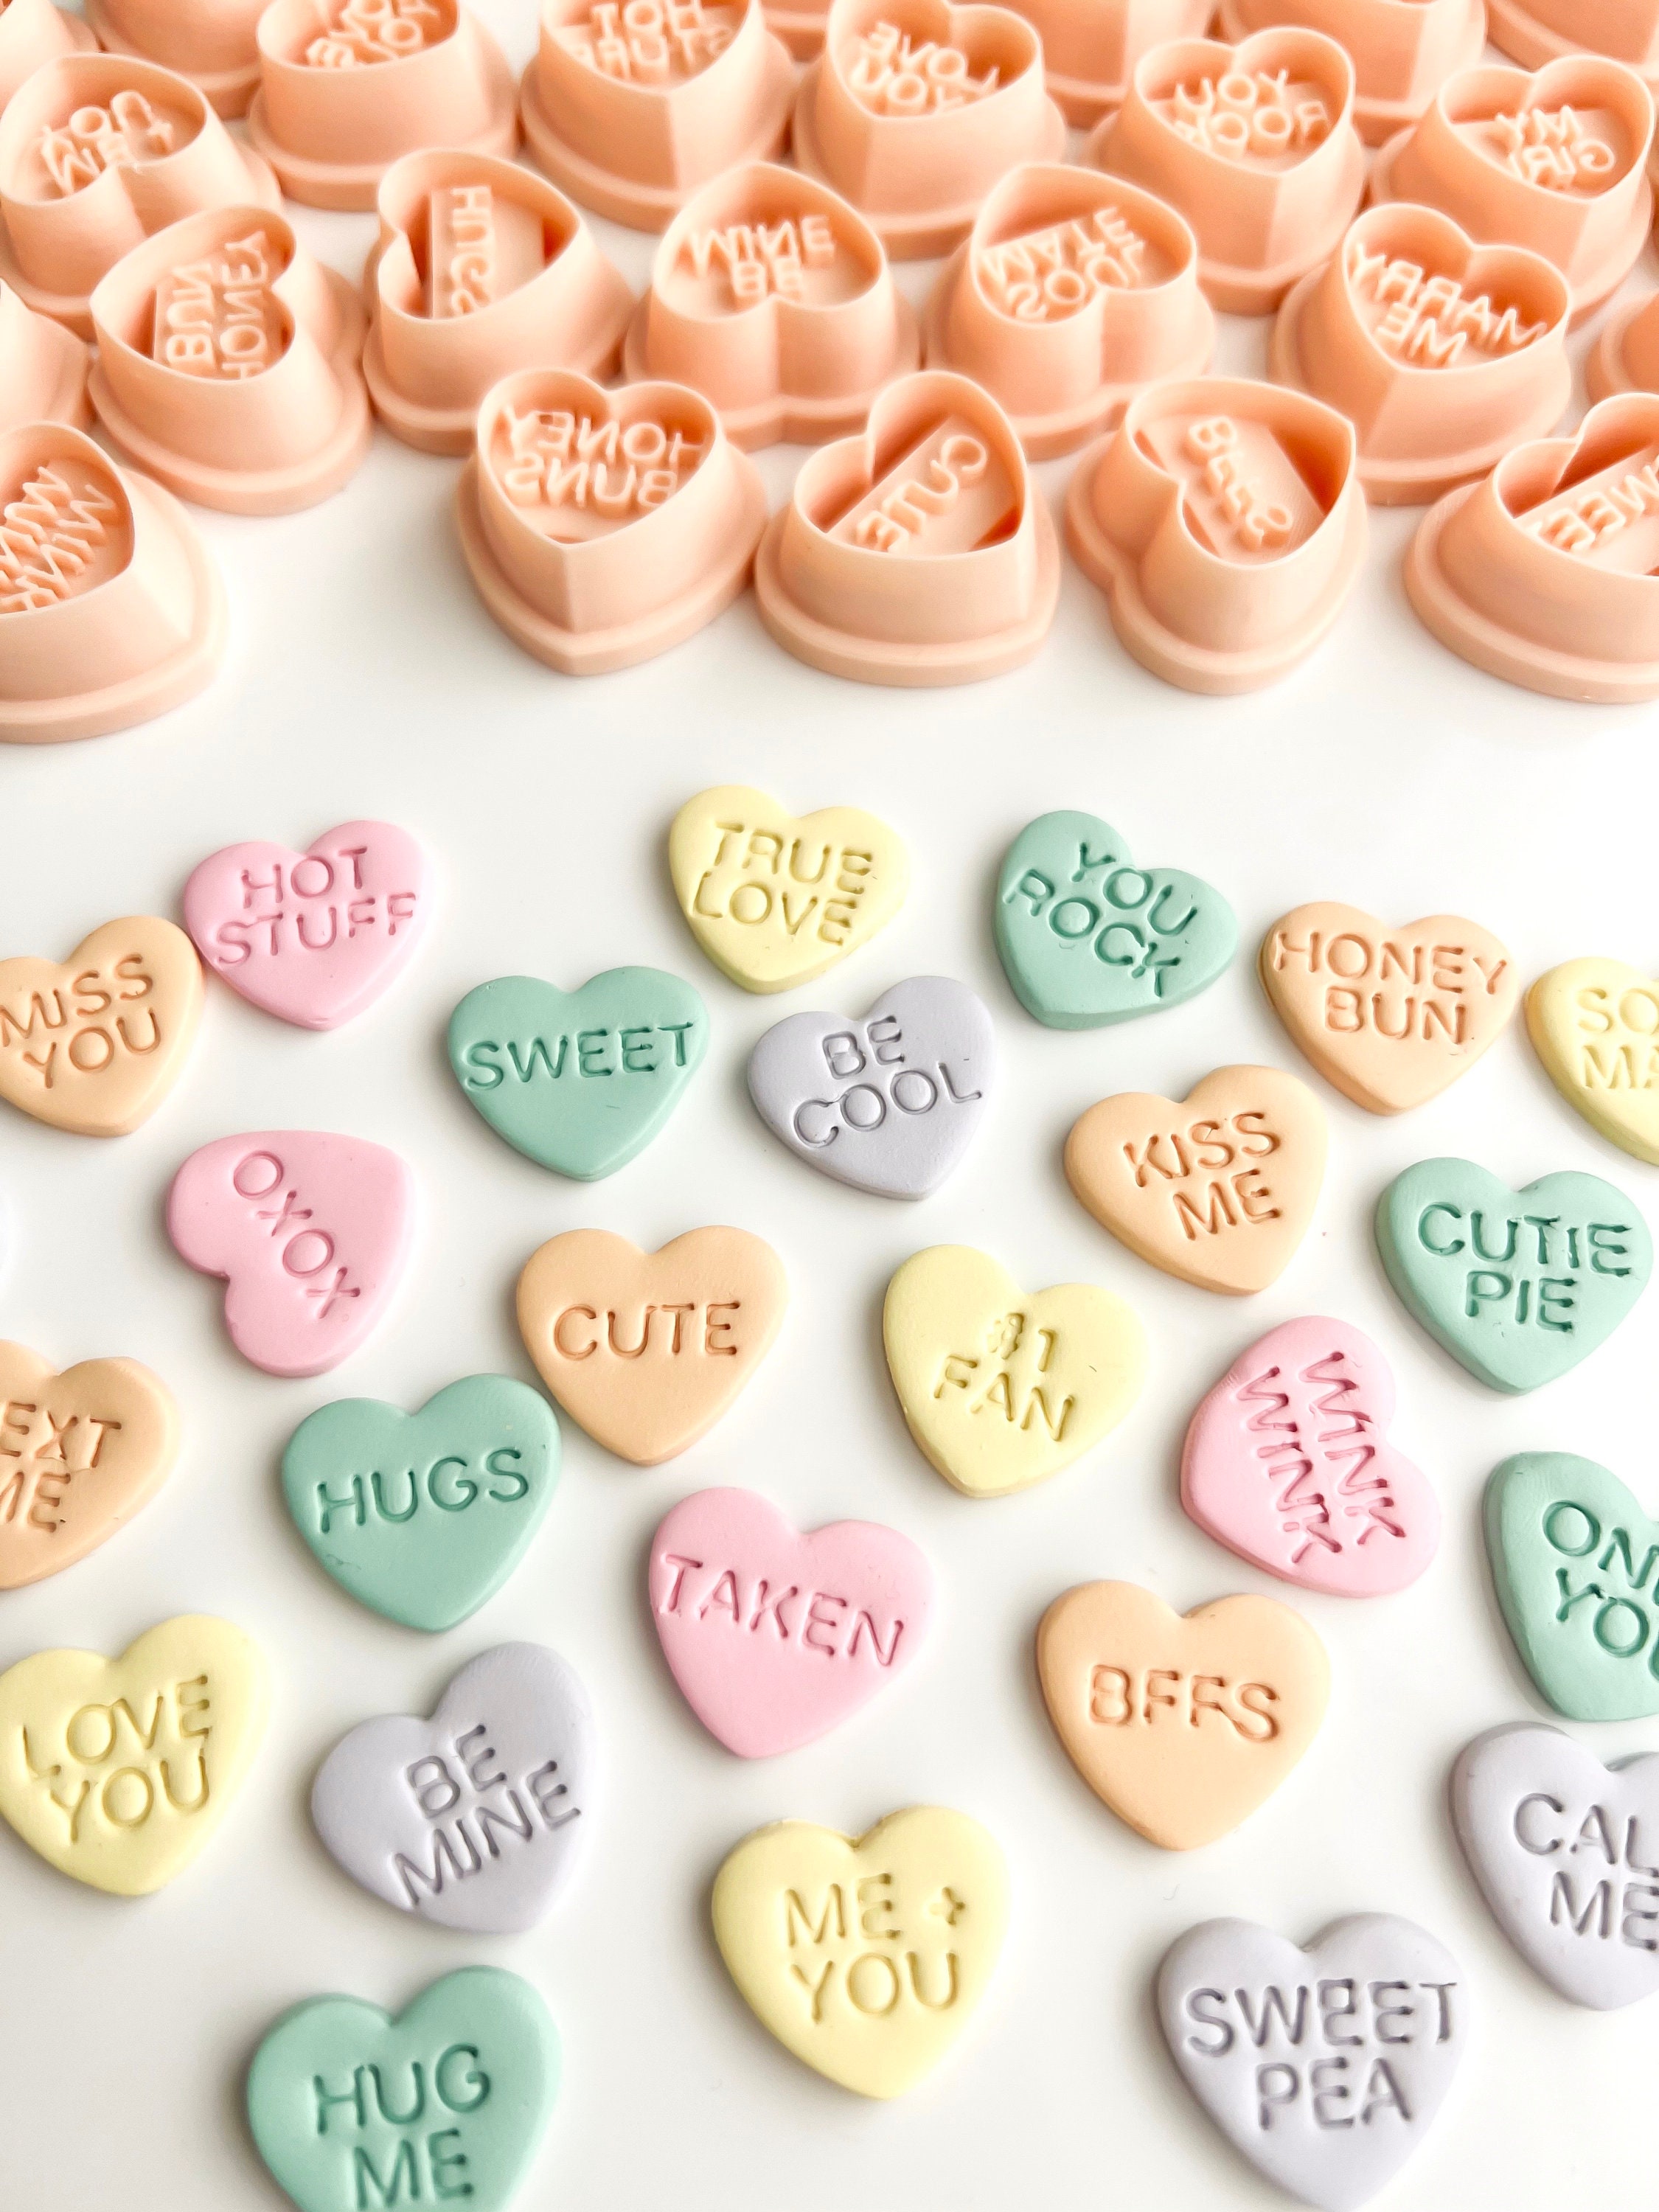 Heartbreak: No Sweethearts candy will be made for Valentine's Day this year